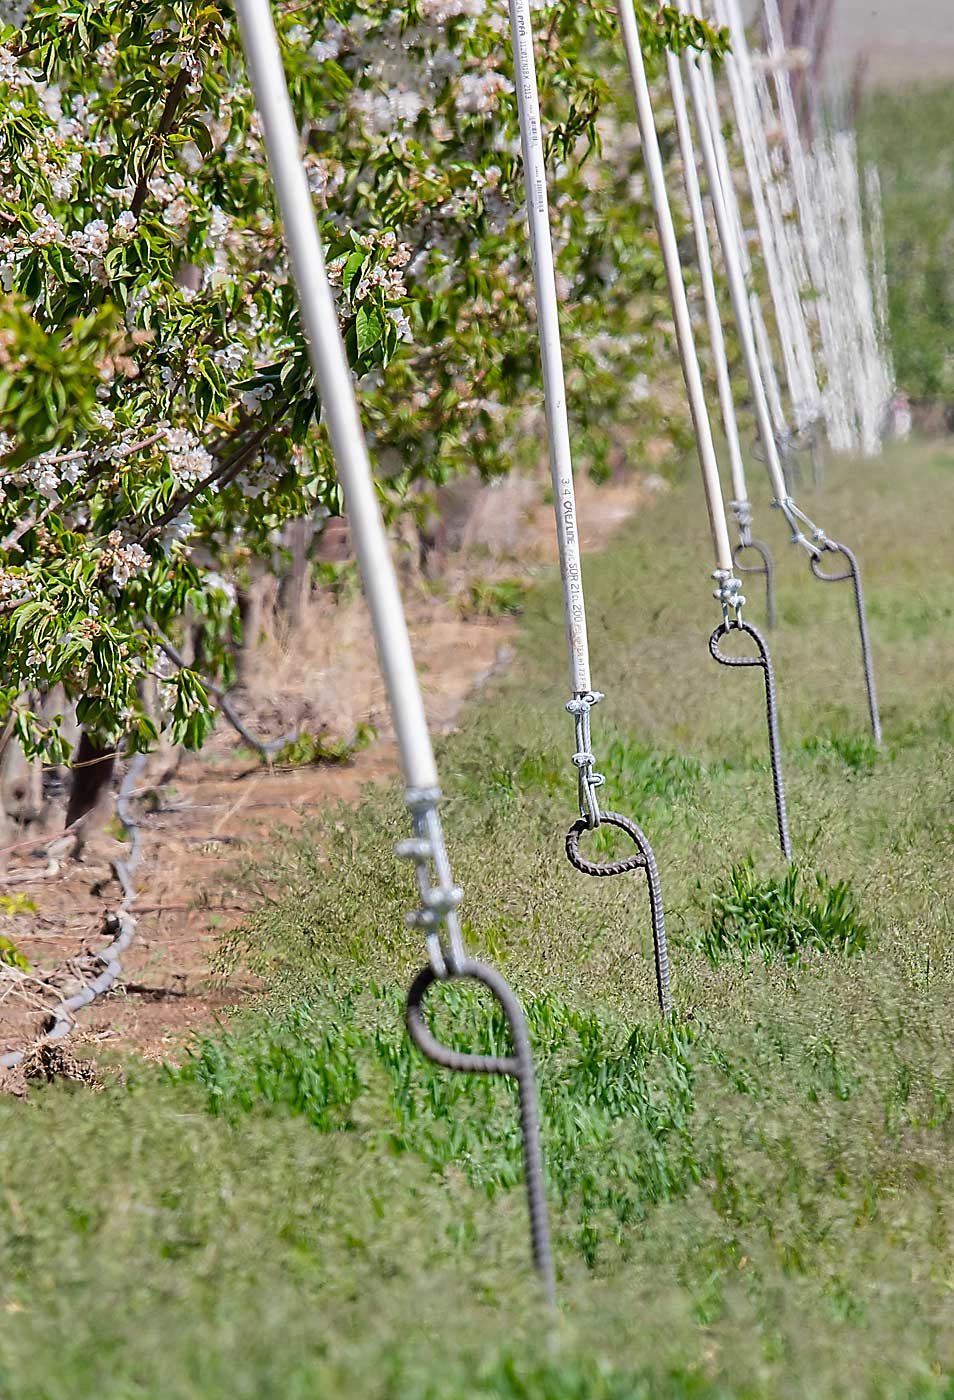 Every piece of a trellis system, from anchors to connectors to cables to posts, should be accounted for in terms of the system’s overall load-bearing abilities, according to engineer Mark De Kleine, who designed the retrofit for this Benton City, Washington, cherry block that includes anchors glued into the hard, rocky ground. (TJ Mullinax/Good Fruit Grower)